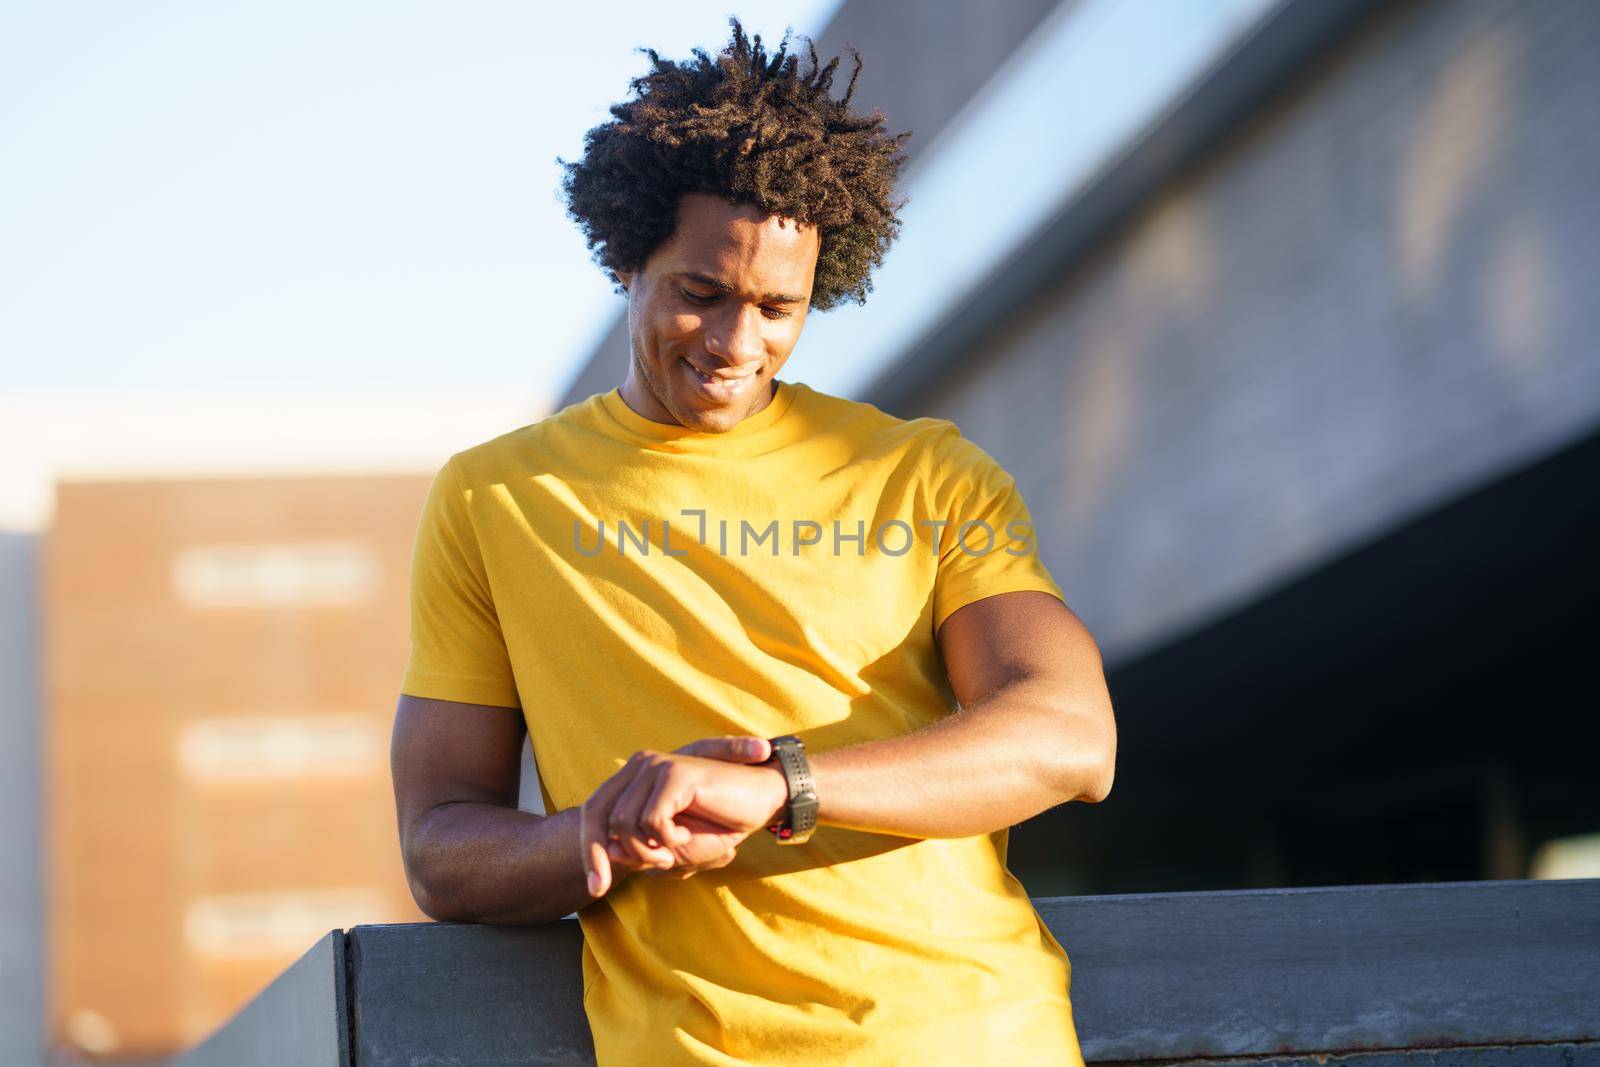 Black man with afro hair consulting his smartwatch to view his training data.